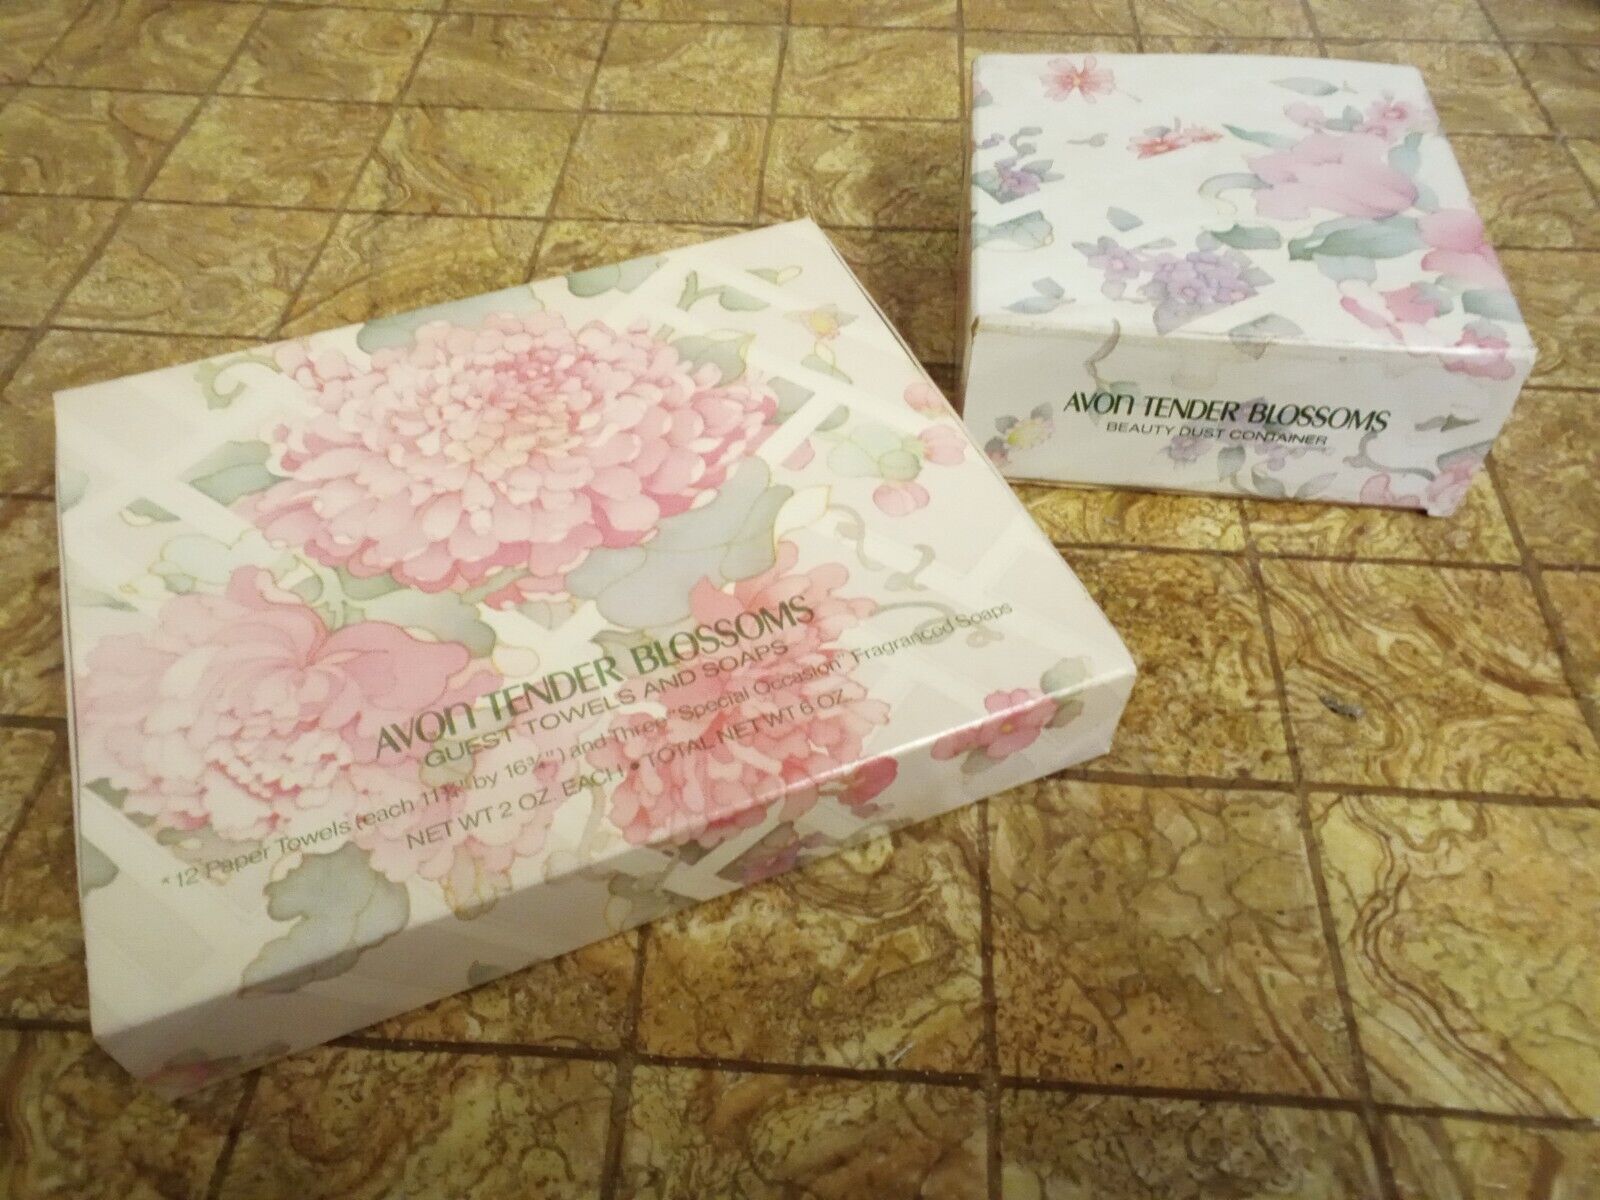 Vtg Avon TENDER BLOSSOMS Dust Container/ Guest Towels & Soaps(Beautiful Designs)